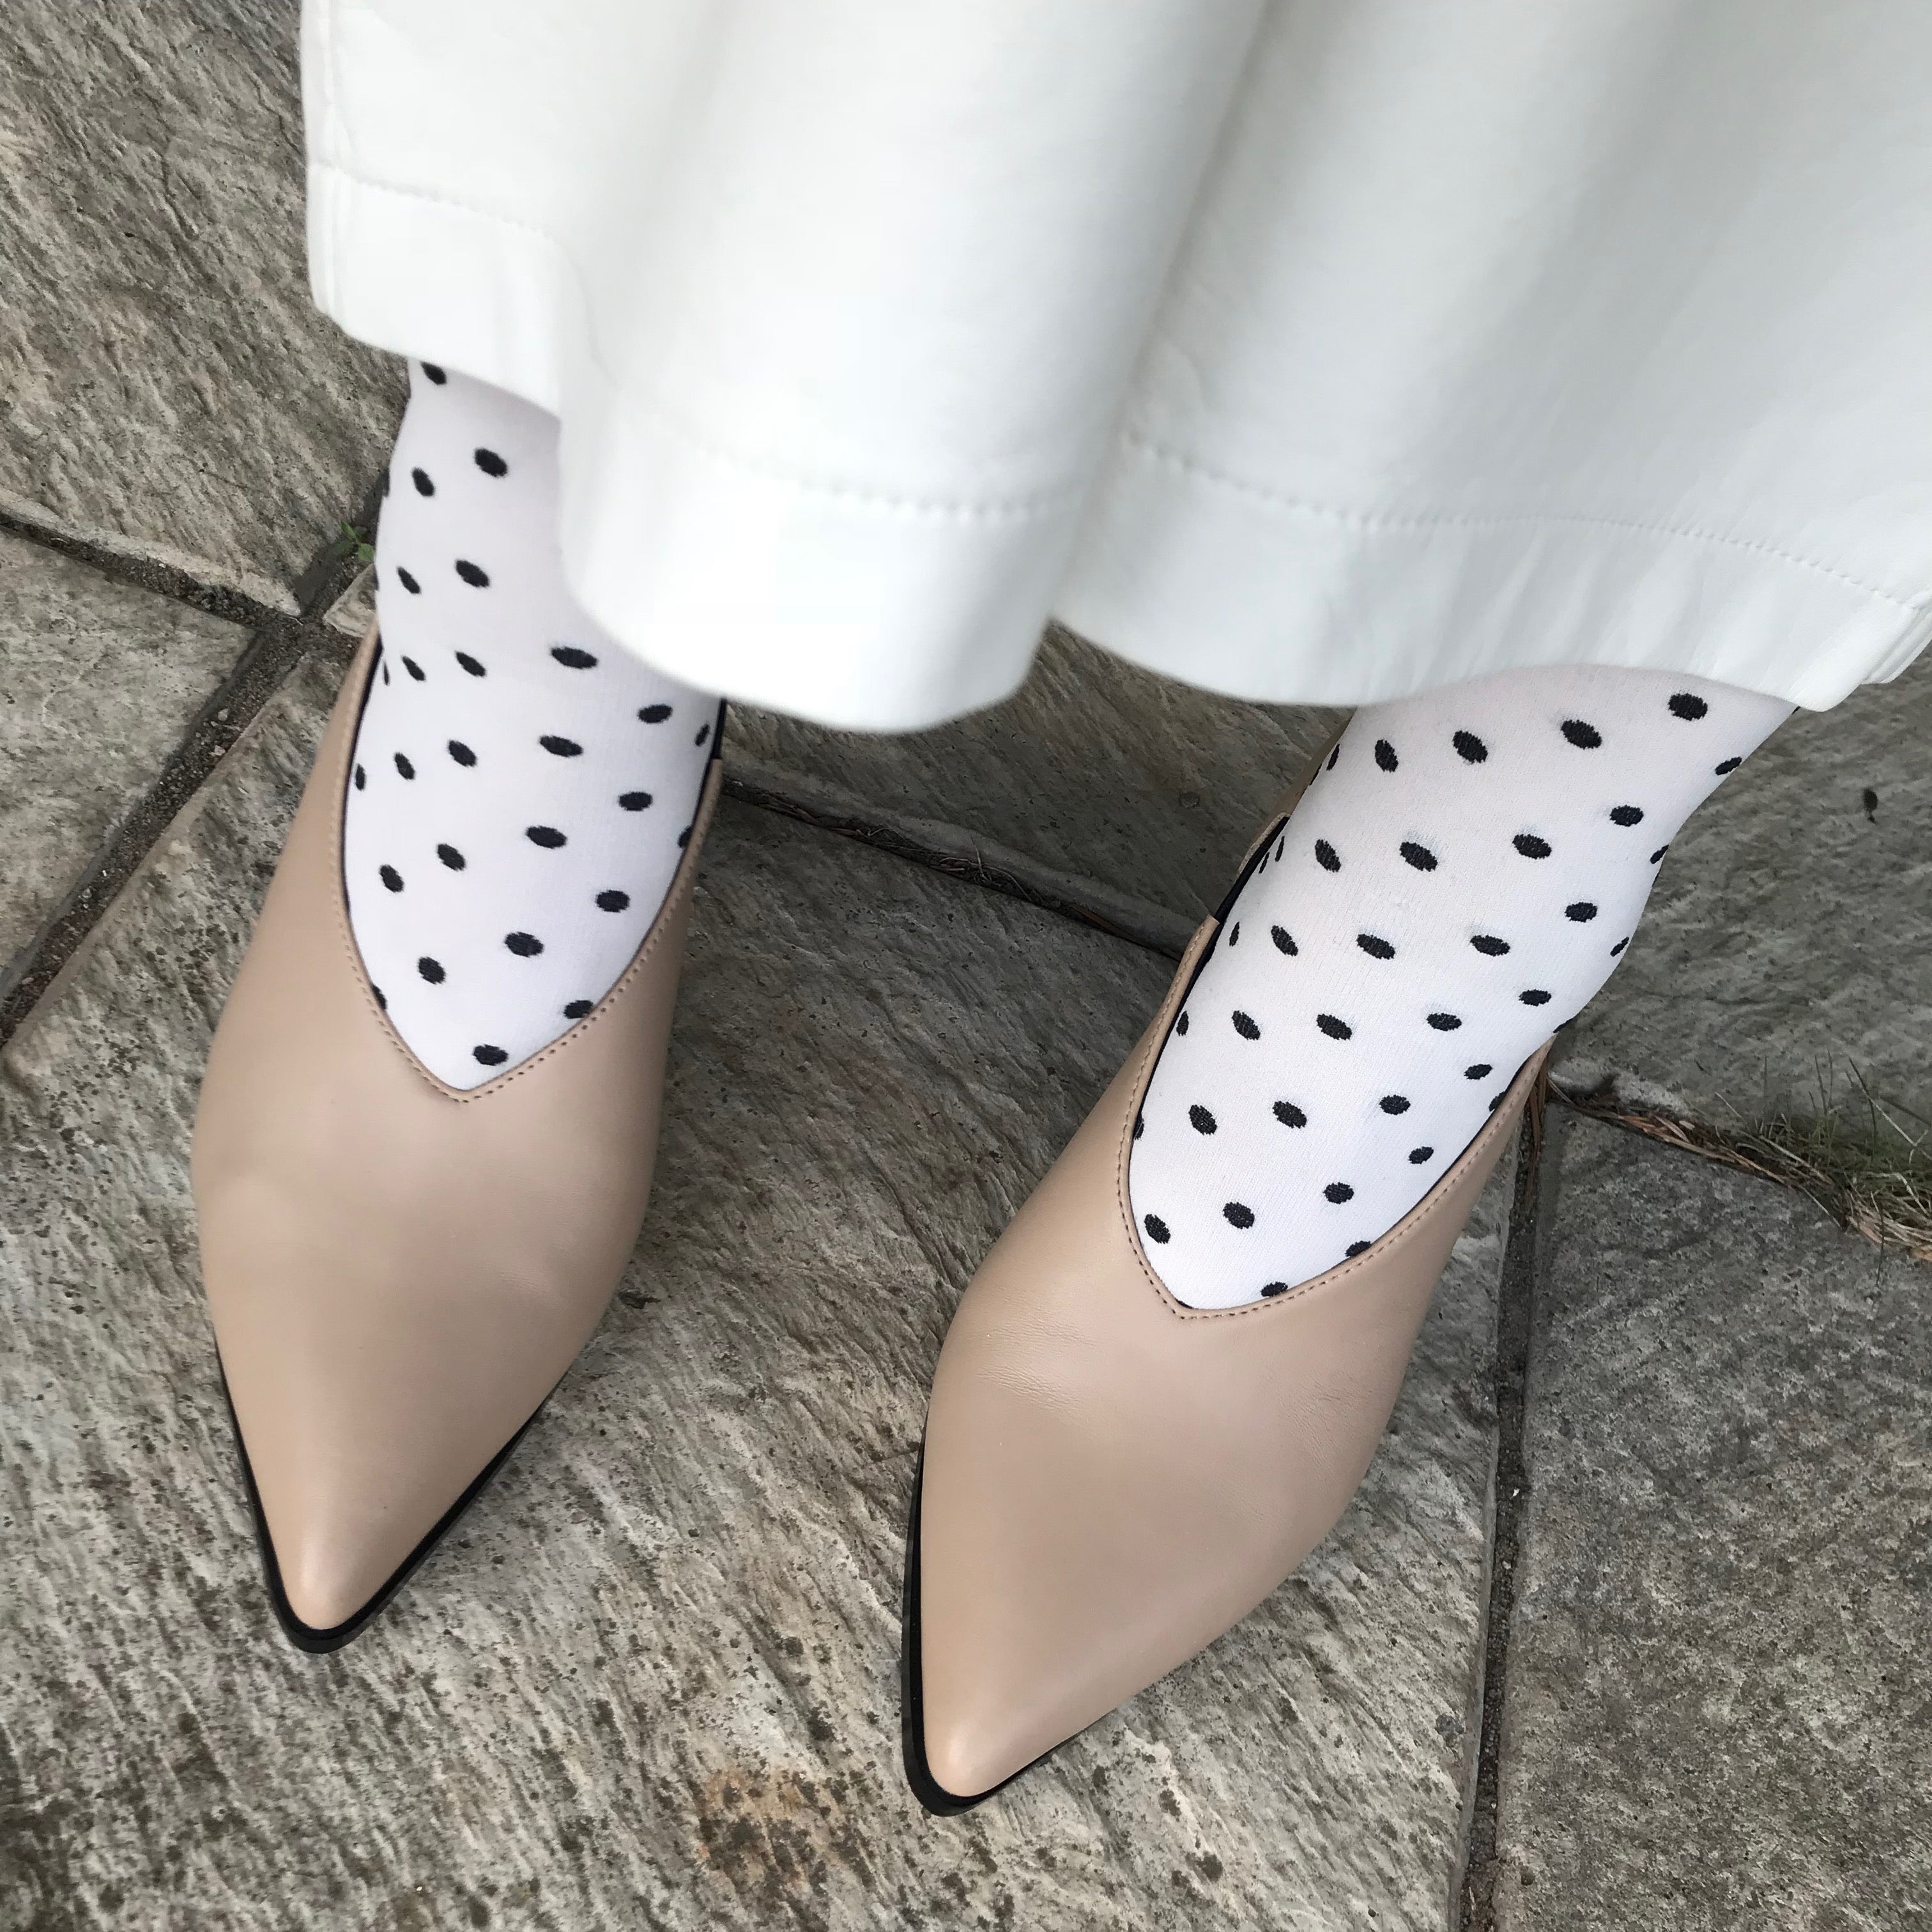 Roach Killer V-cut pump from Swedish shoe brand ANNY NORD.  A classic shoe with a modern twist. Here styled with polka dotted socks and leather skirt.